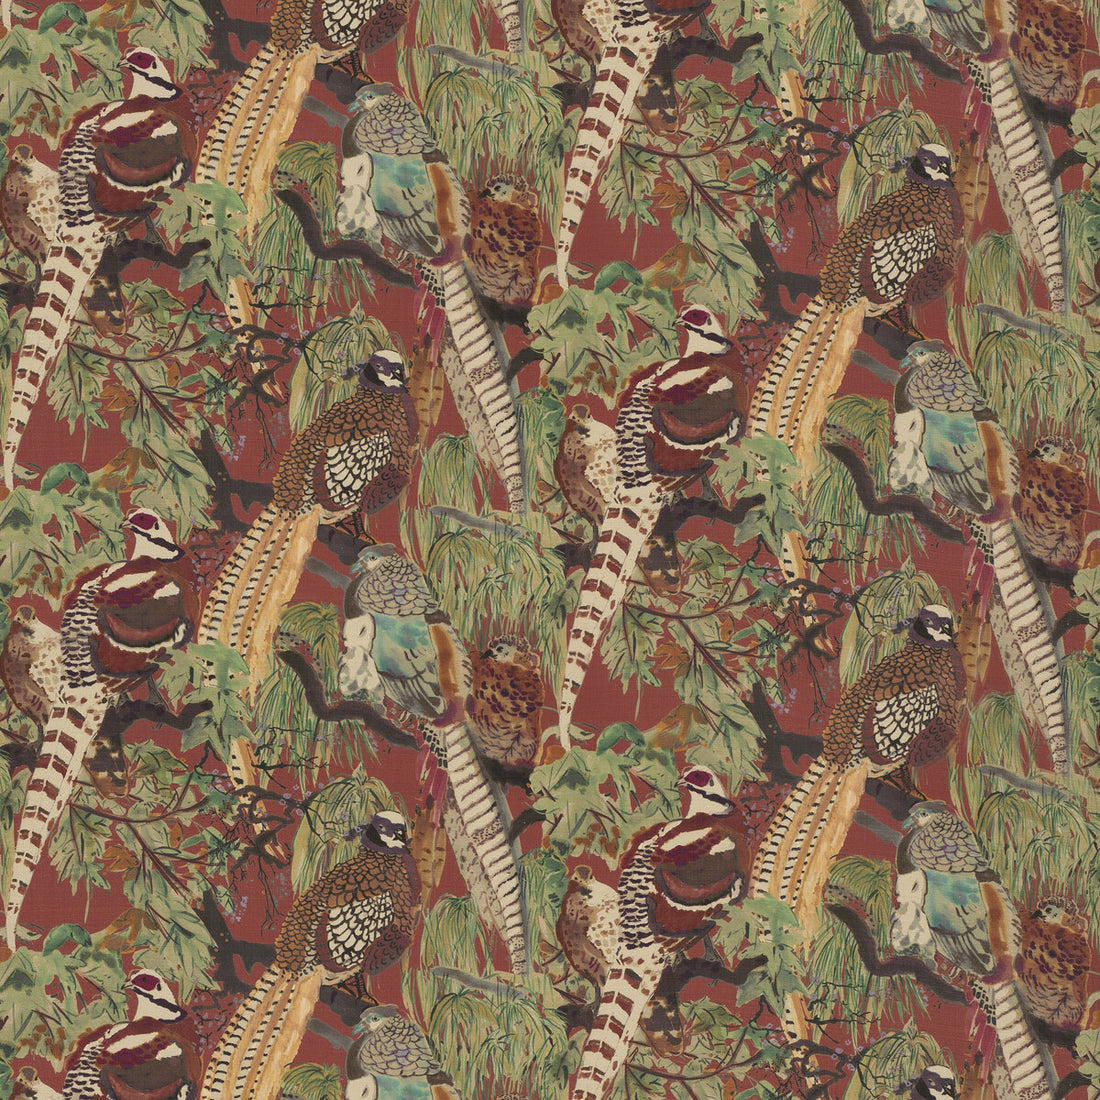 Game Birds Linen fabric in red/plum color - pattern FD269.V54.0 - by Mulberry in the Icons Fabrics collection